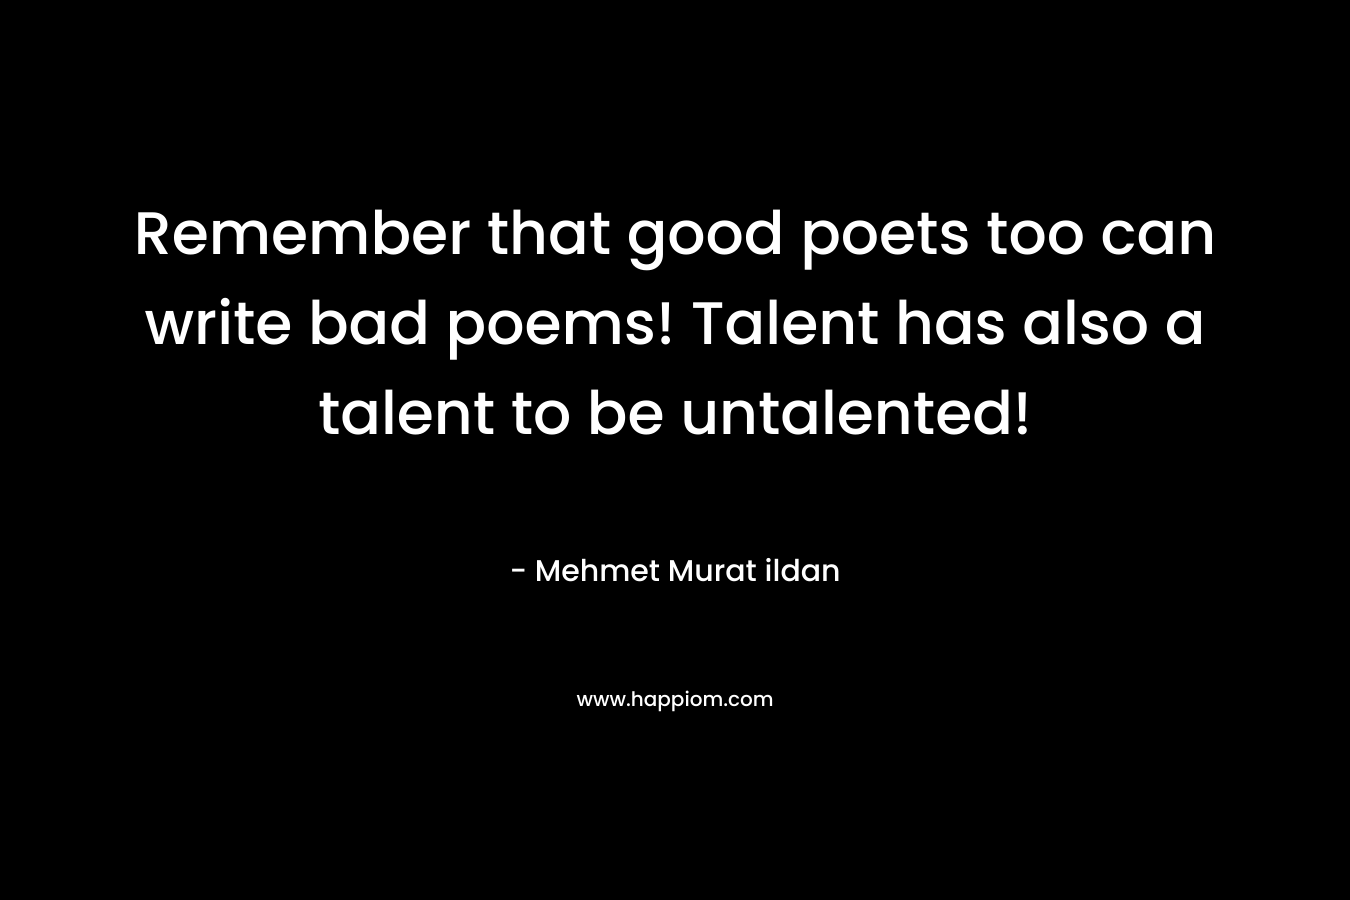 Remember that good poets too can write bad poems! Talent has also a talent to be untalented!